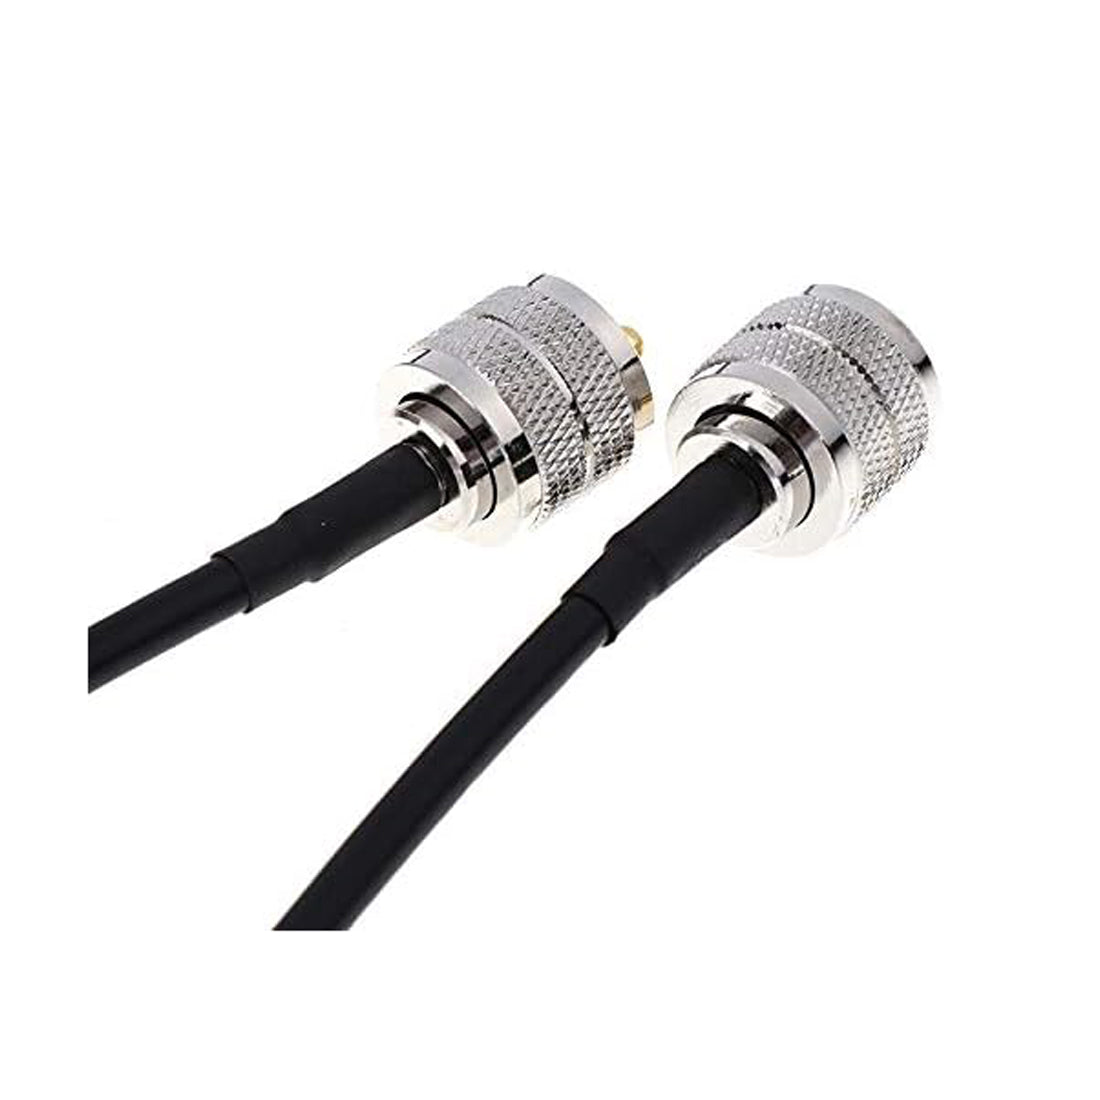 Midland Connecting cable for CB Midland R 45/58-U transceivers, 45 cm transceiver cable